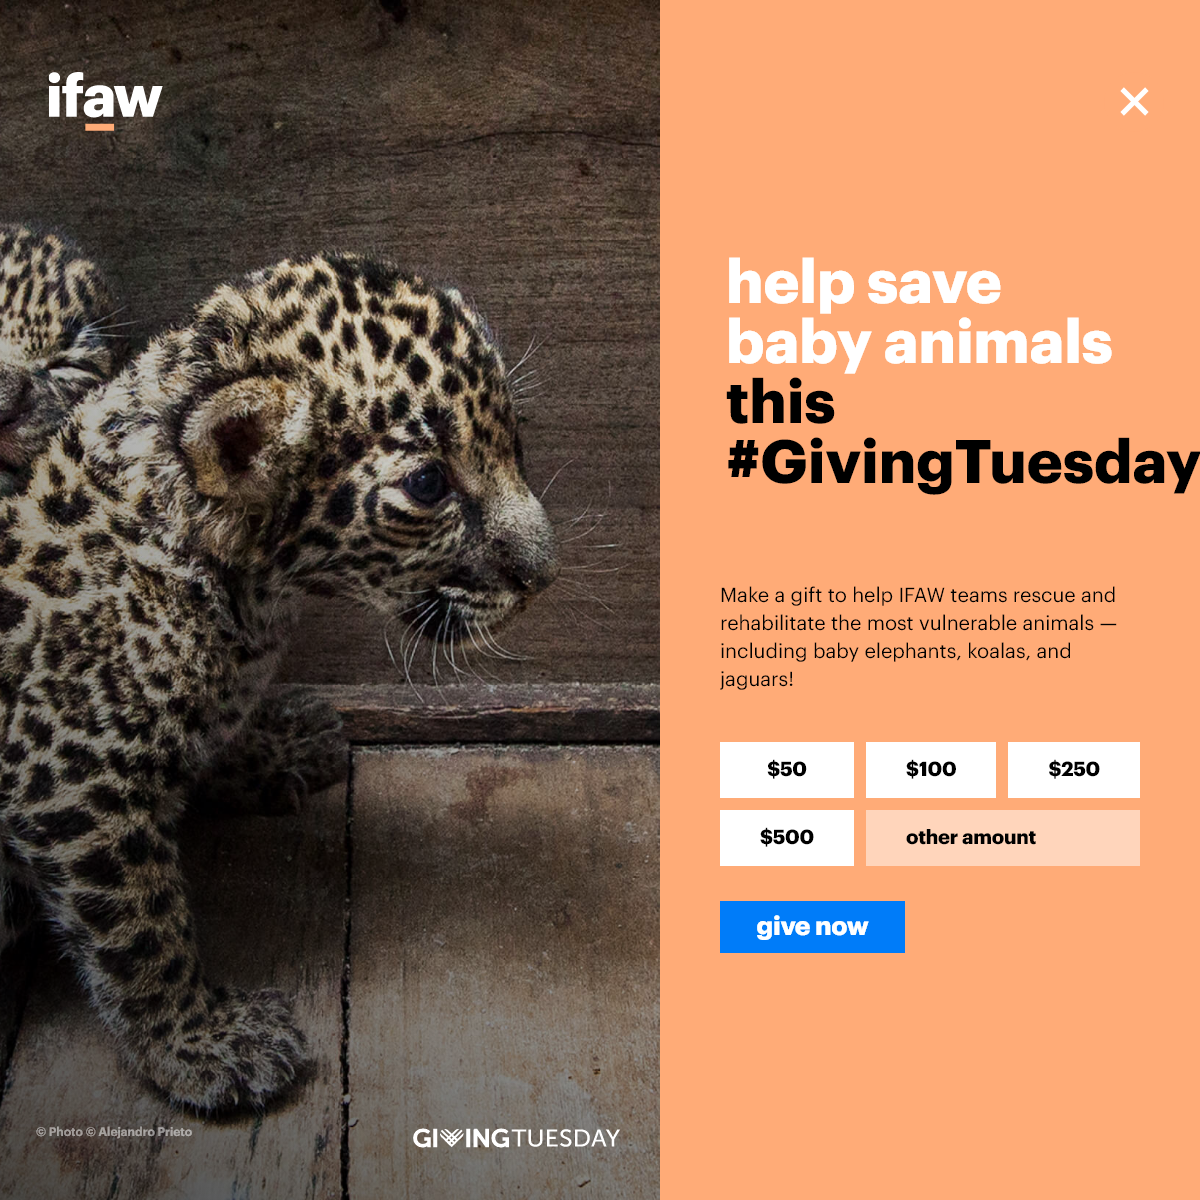 A complete backup of ifaw.org